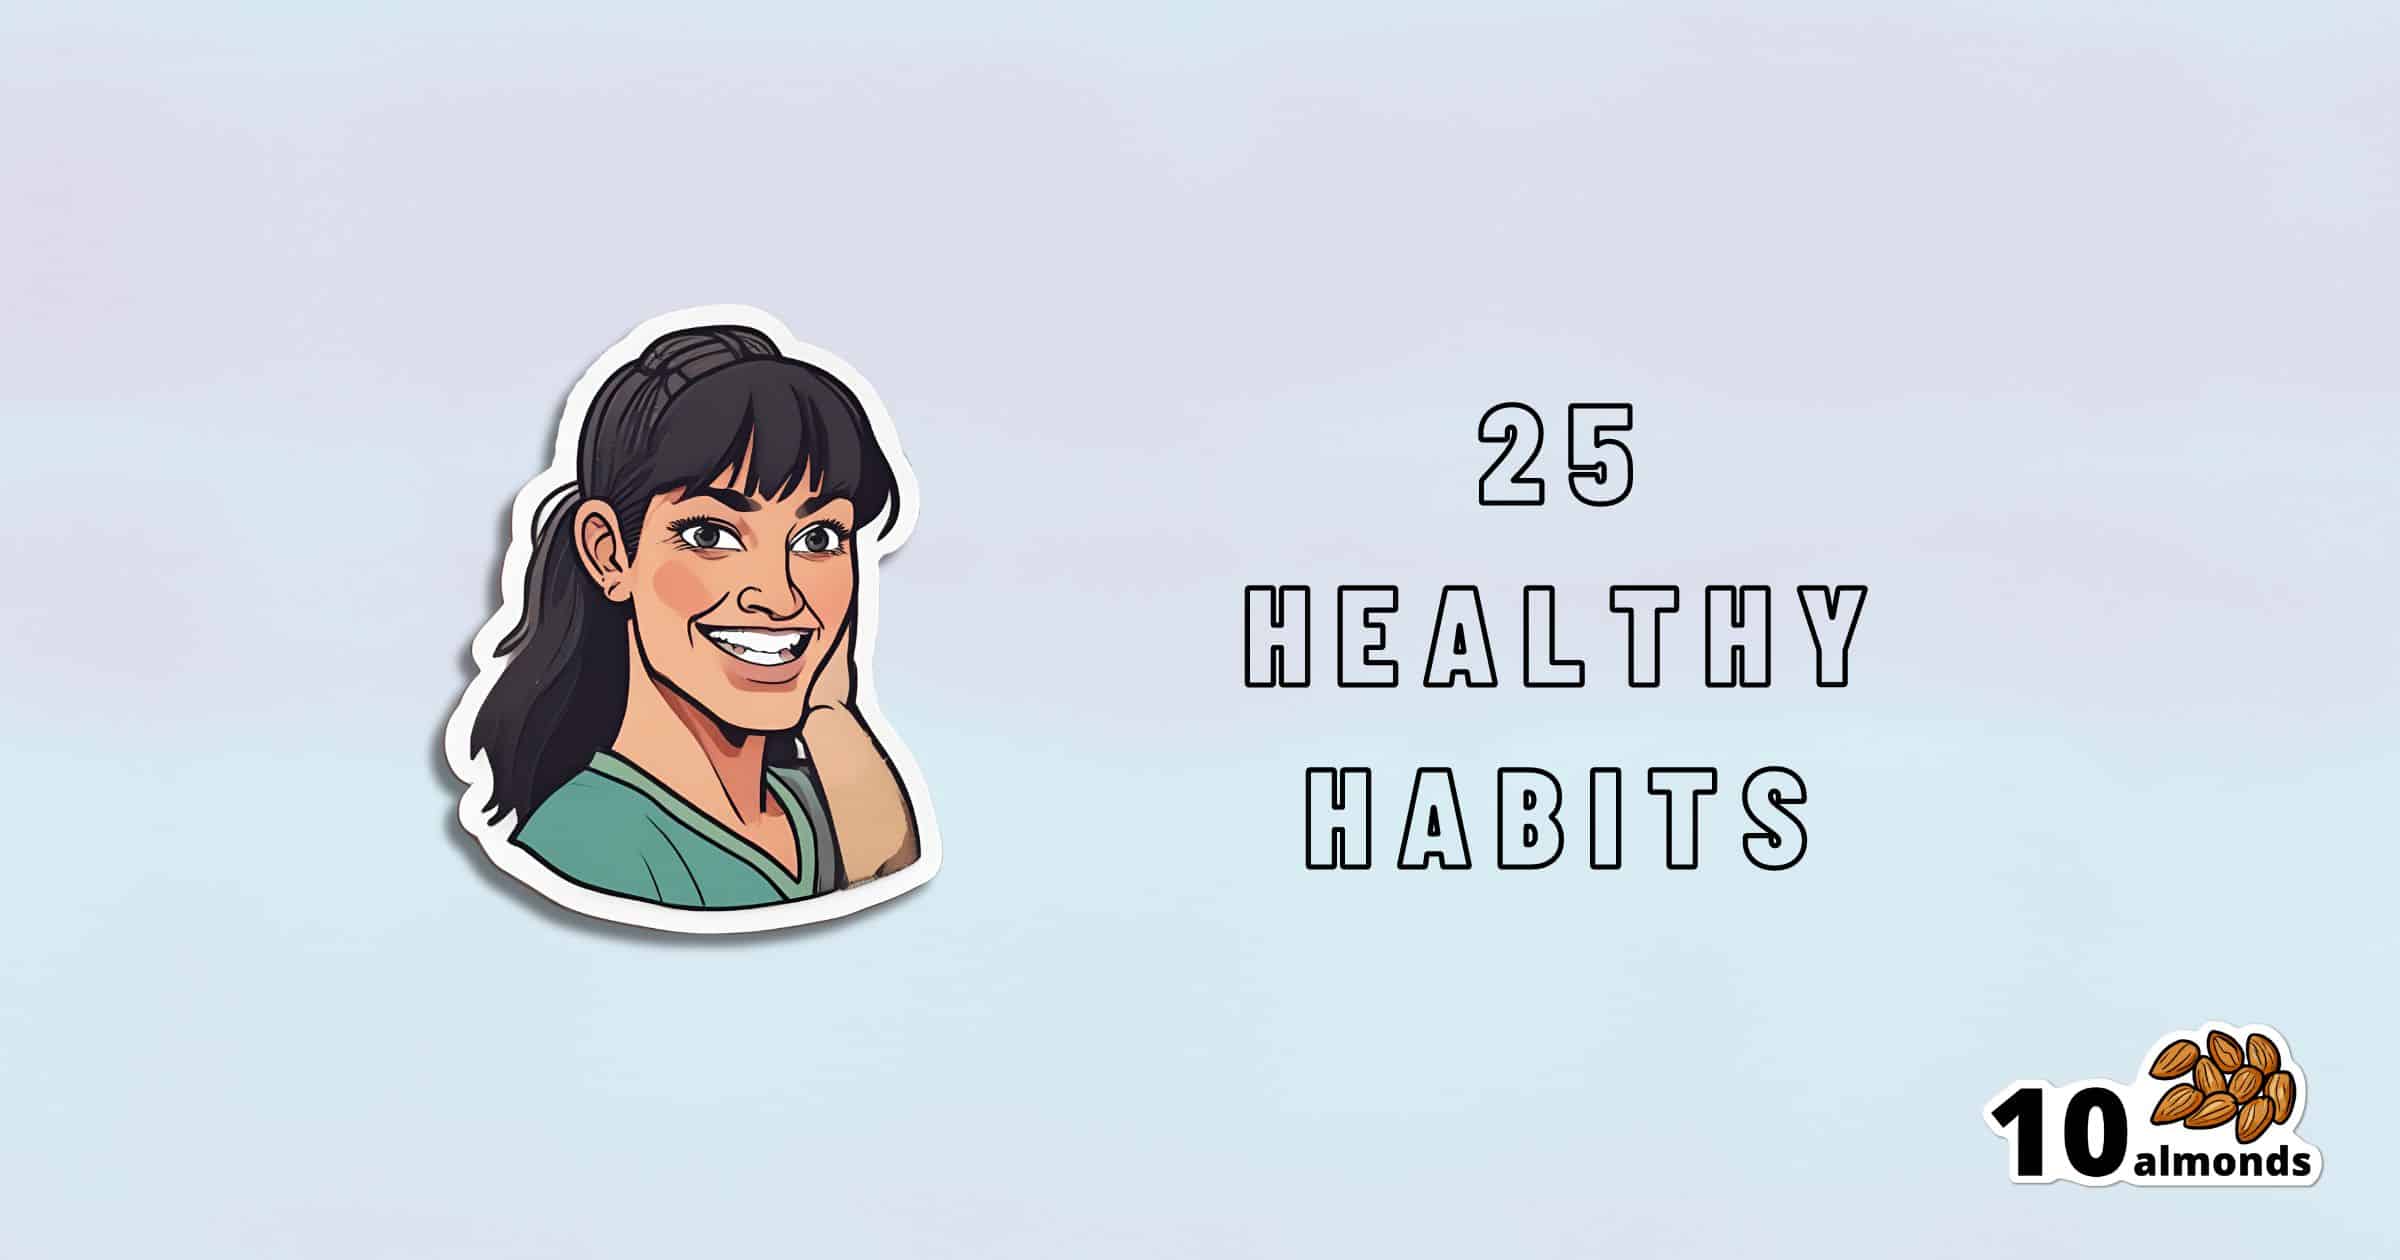 An illustration of a smiling woman with text on the right that reads "25 Healthy Habits to Change Your Life." In the bottom right corner, there is a "10 almonds" logo featuring ten almonds. The background is a light gradient.